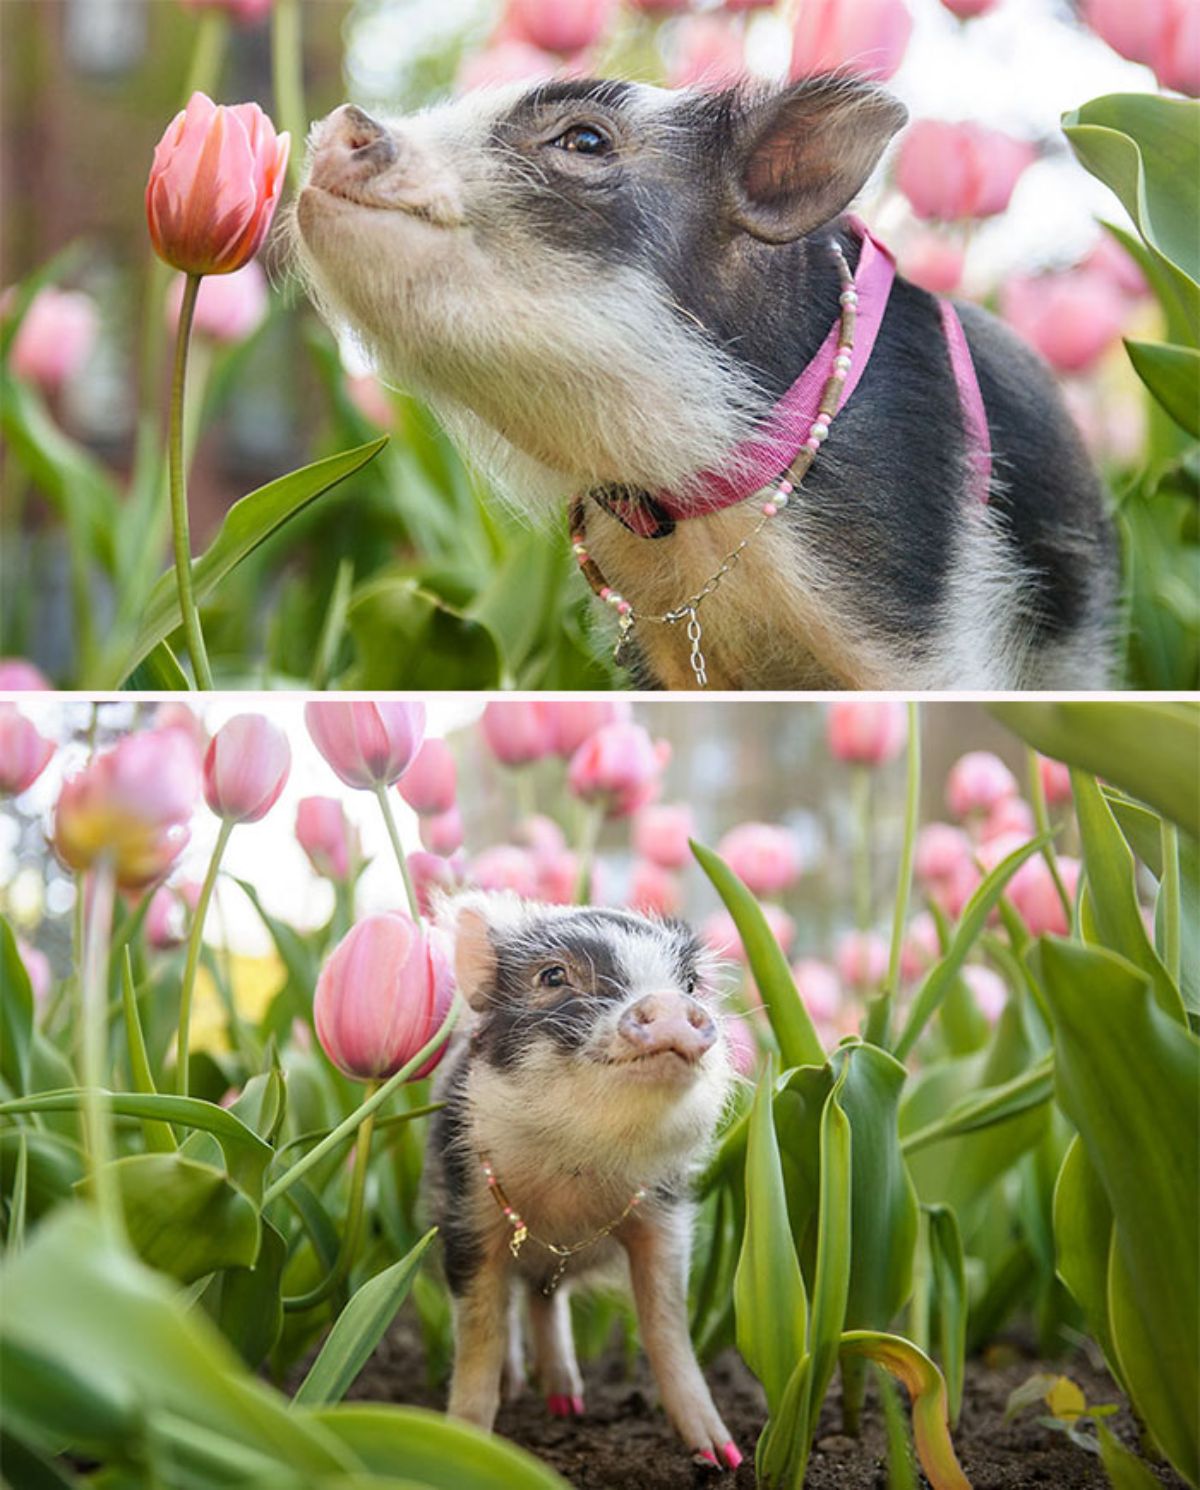 black and white piglet wearing a pink collar standing under a field of pink tulips